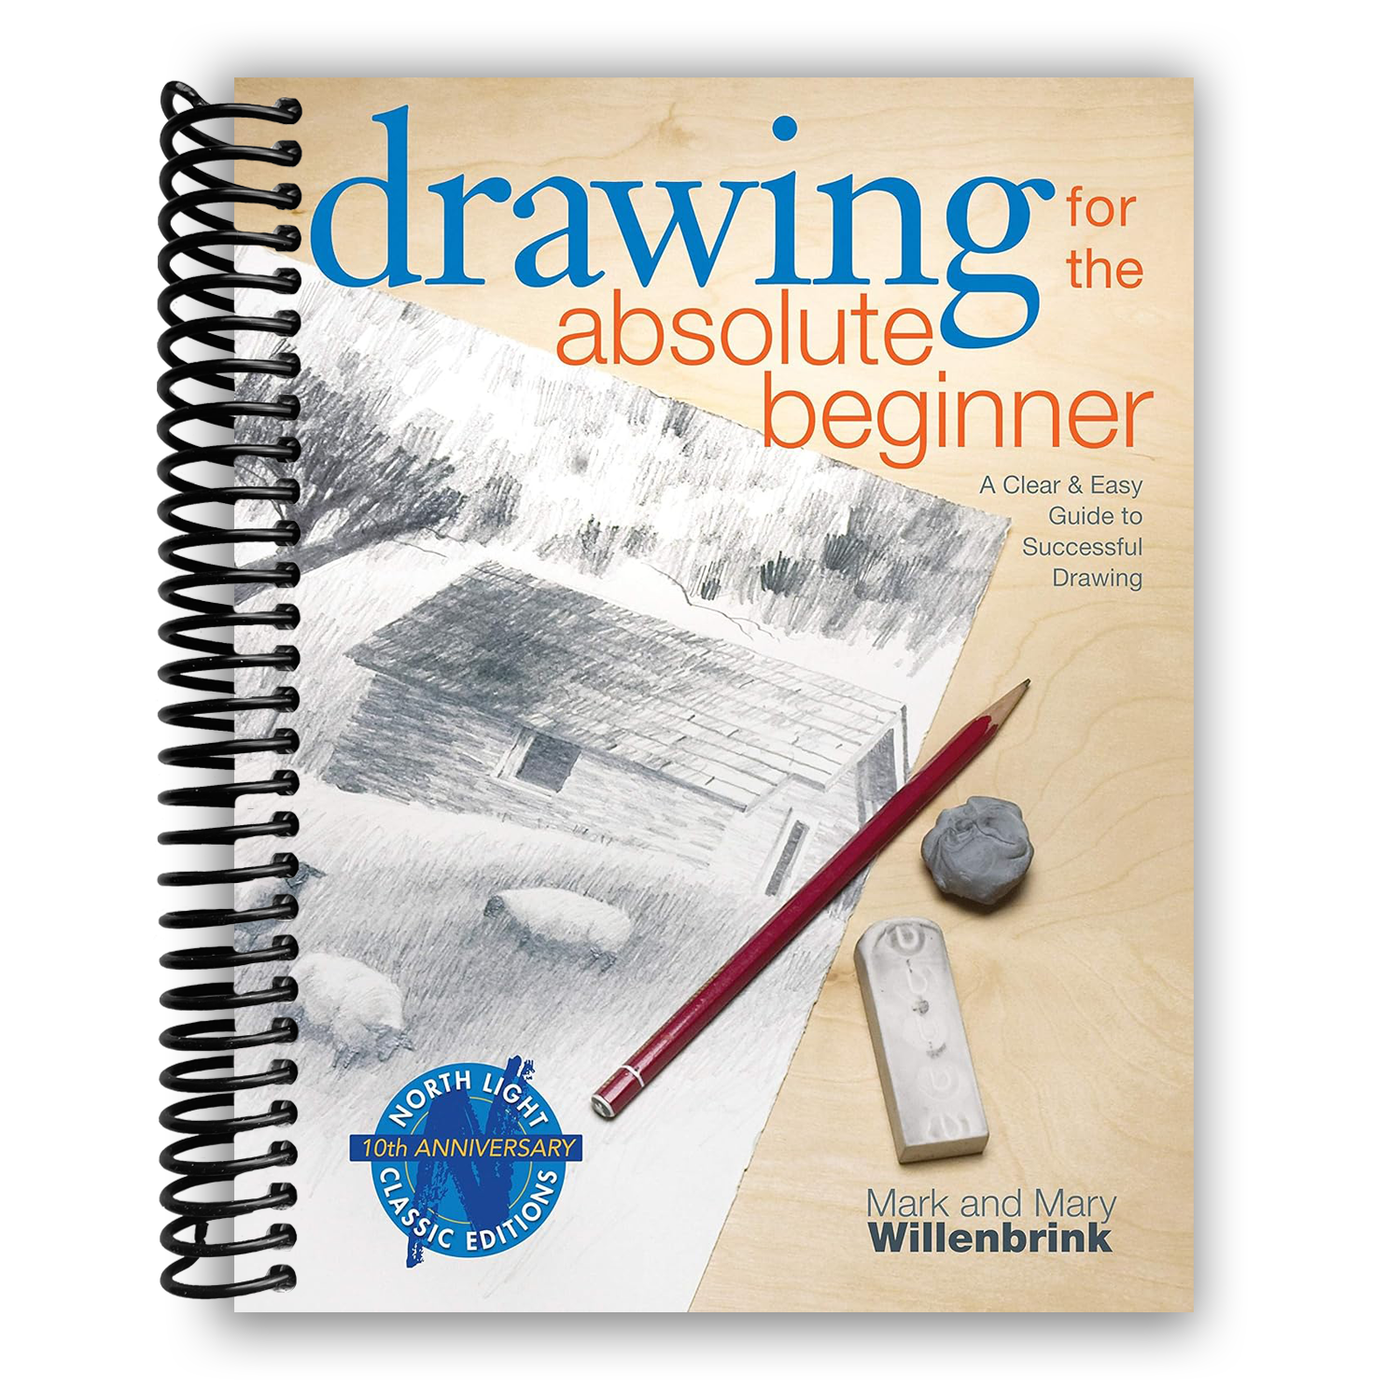 Drawing for the Absolute Beginner: A Clear & Easy Guide to Successful Drawing (Art for the Absolute Beginner) - (Spiral bound)